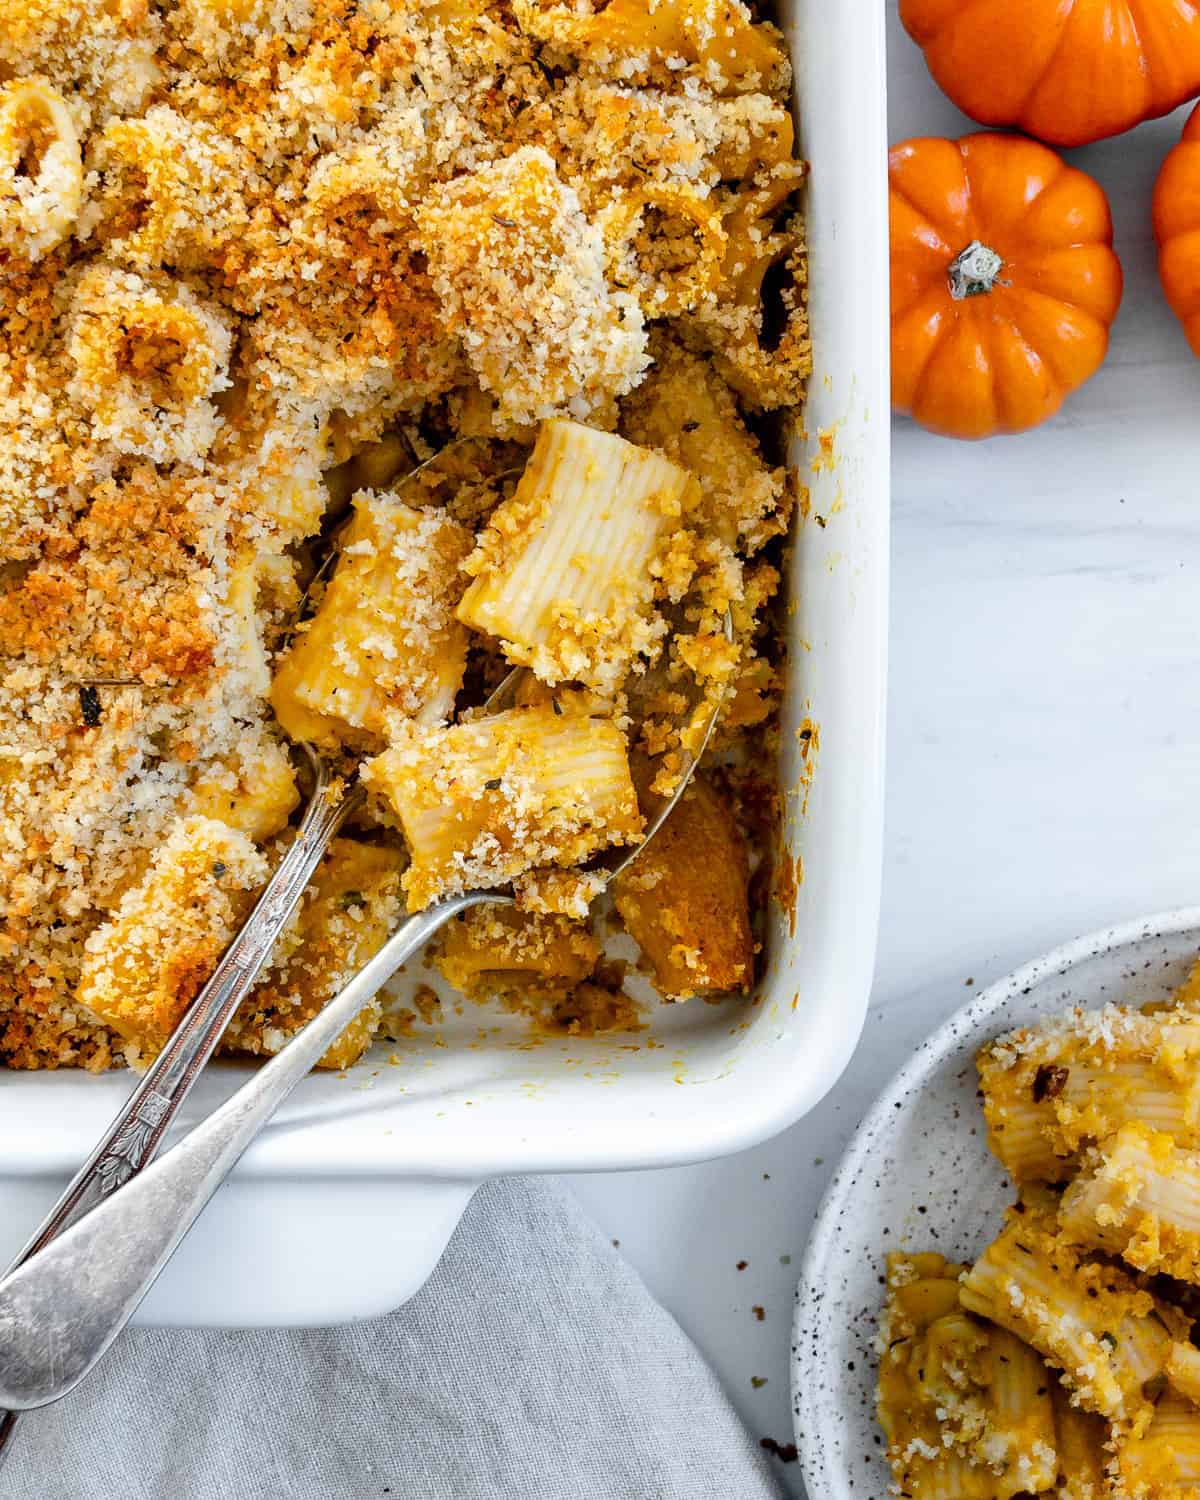 Pumpkin pasta baked in a white casserole dish with baby pumpkins on the side.